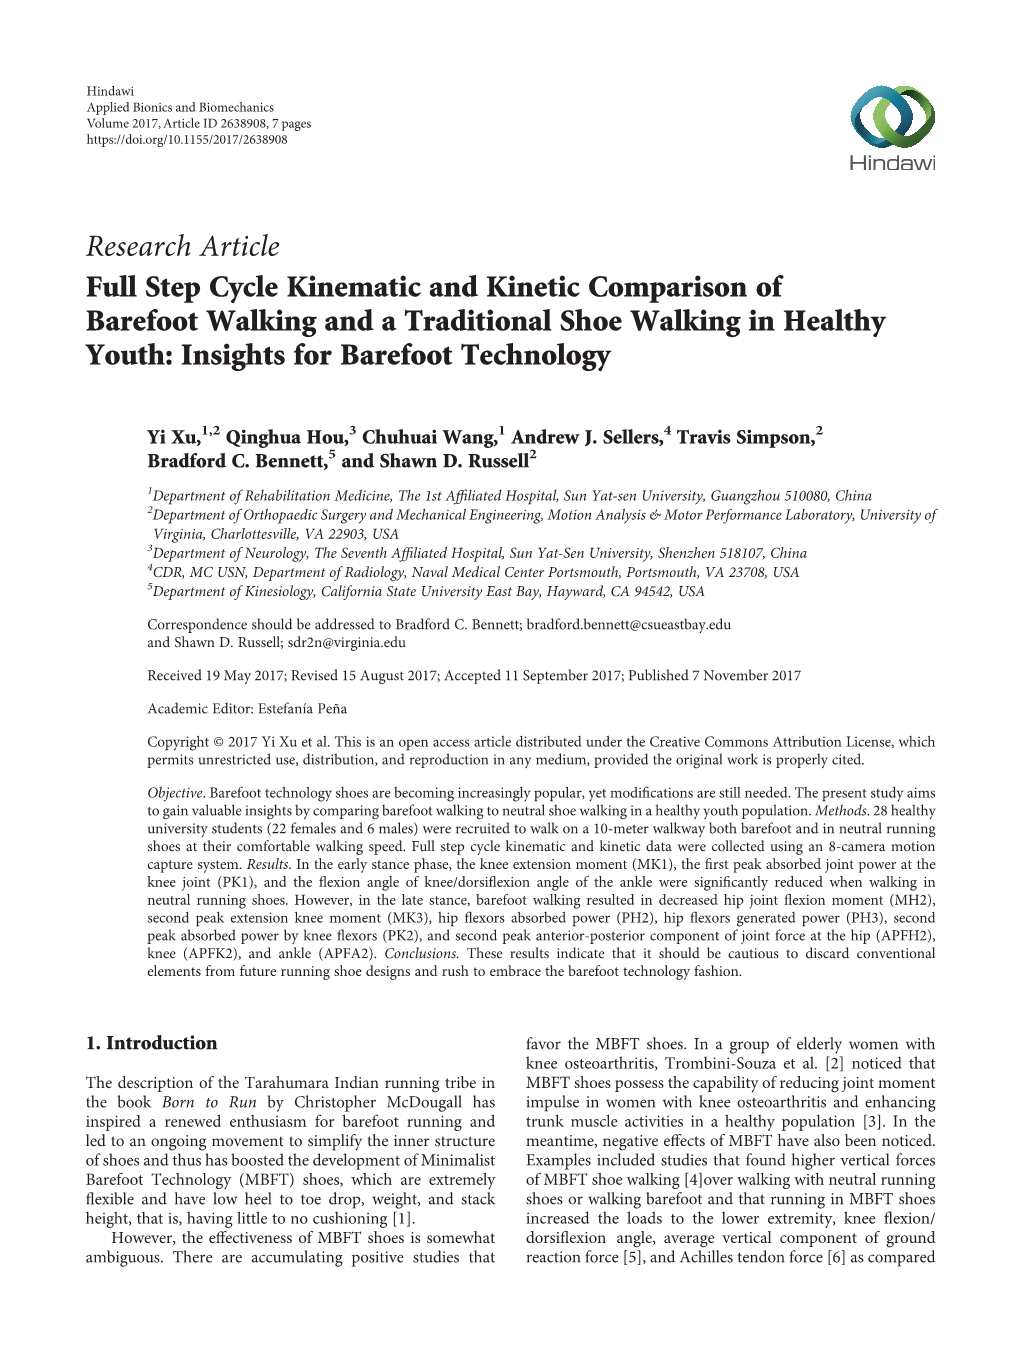 Full Step Cycle Kinematic and Kinetic Comparison of Barefoot Walking and a Traditional Shoe Walking in Healthy Youth: Insights for Barefoot Technology